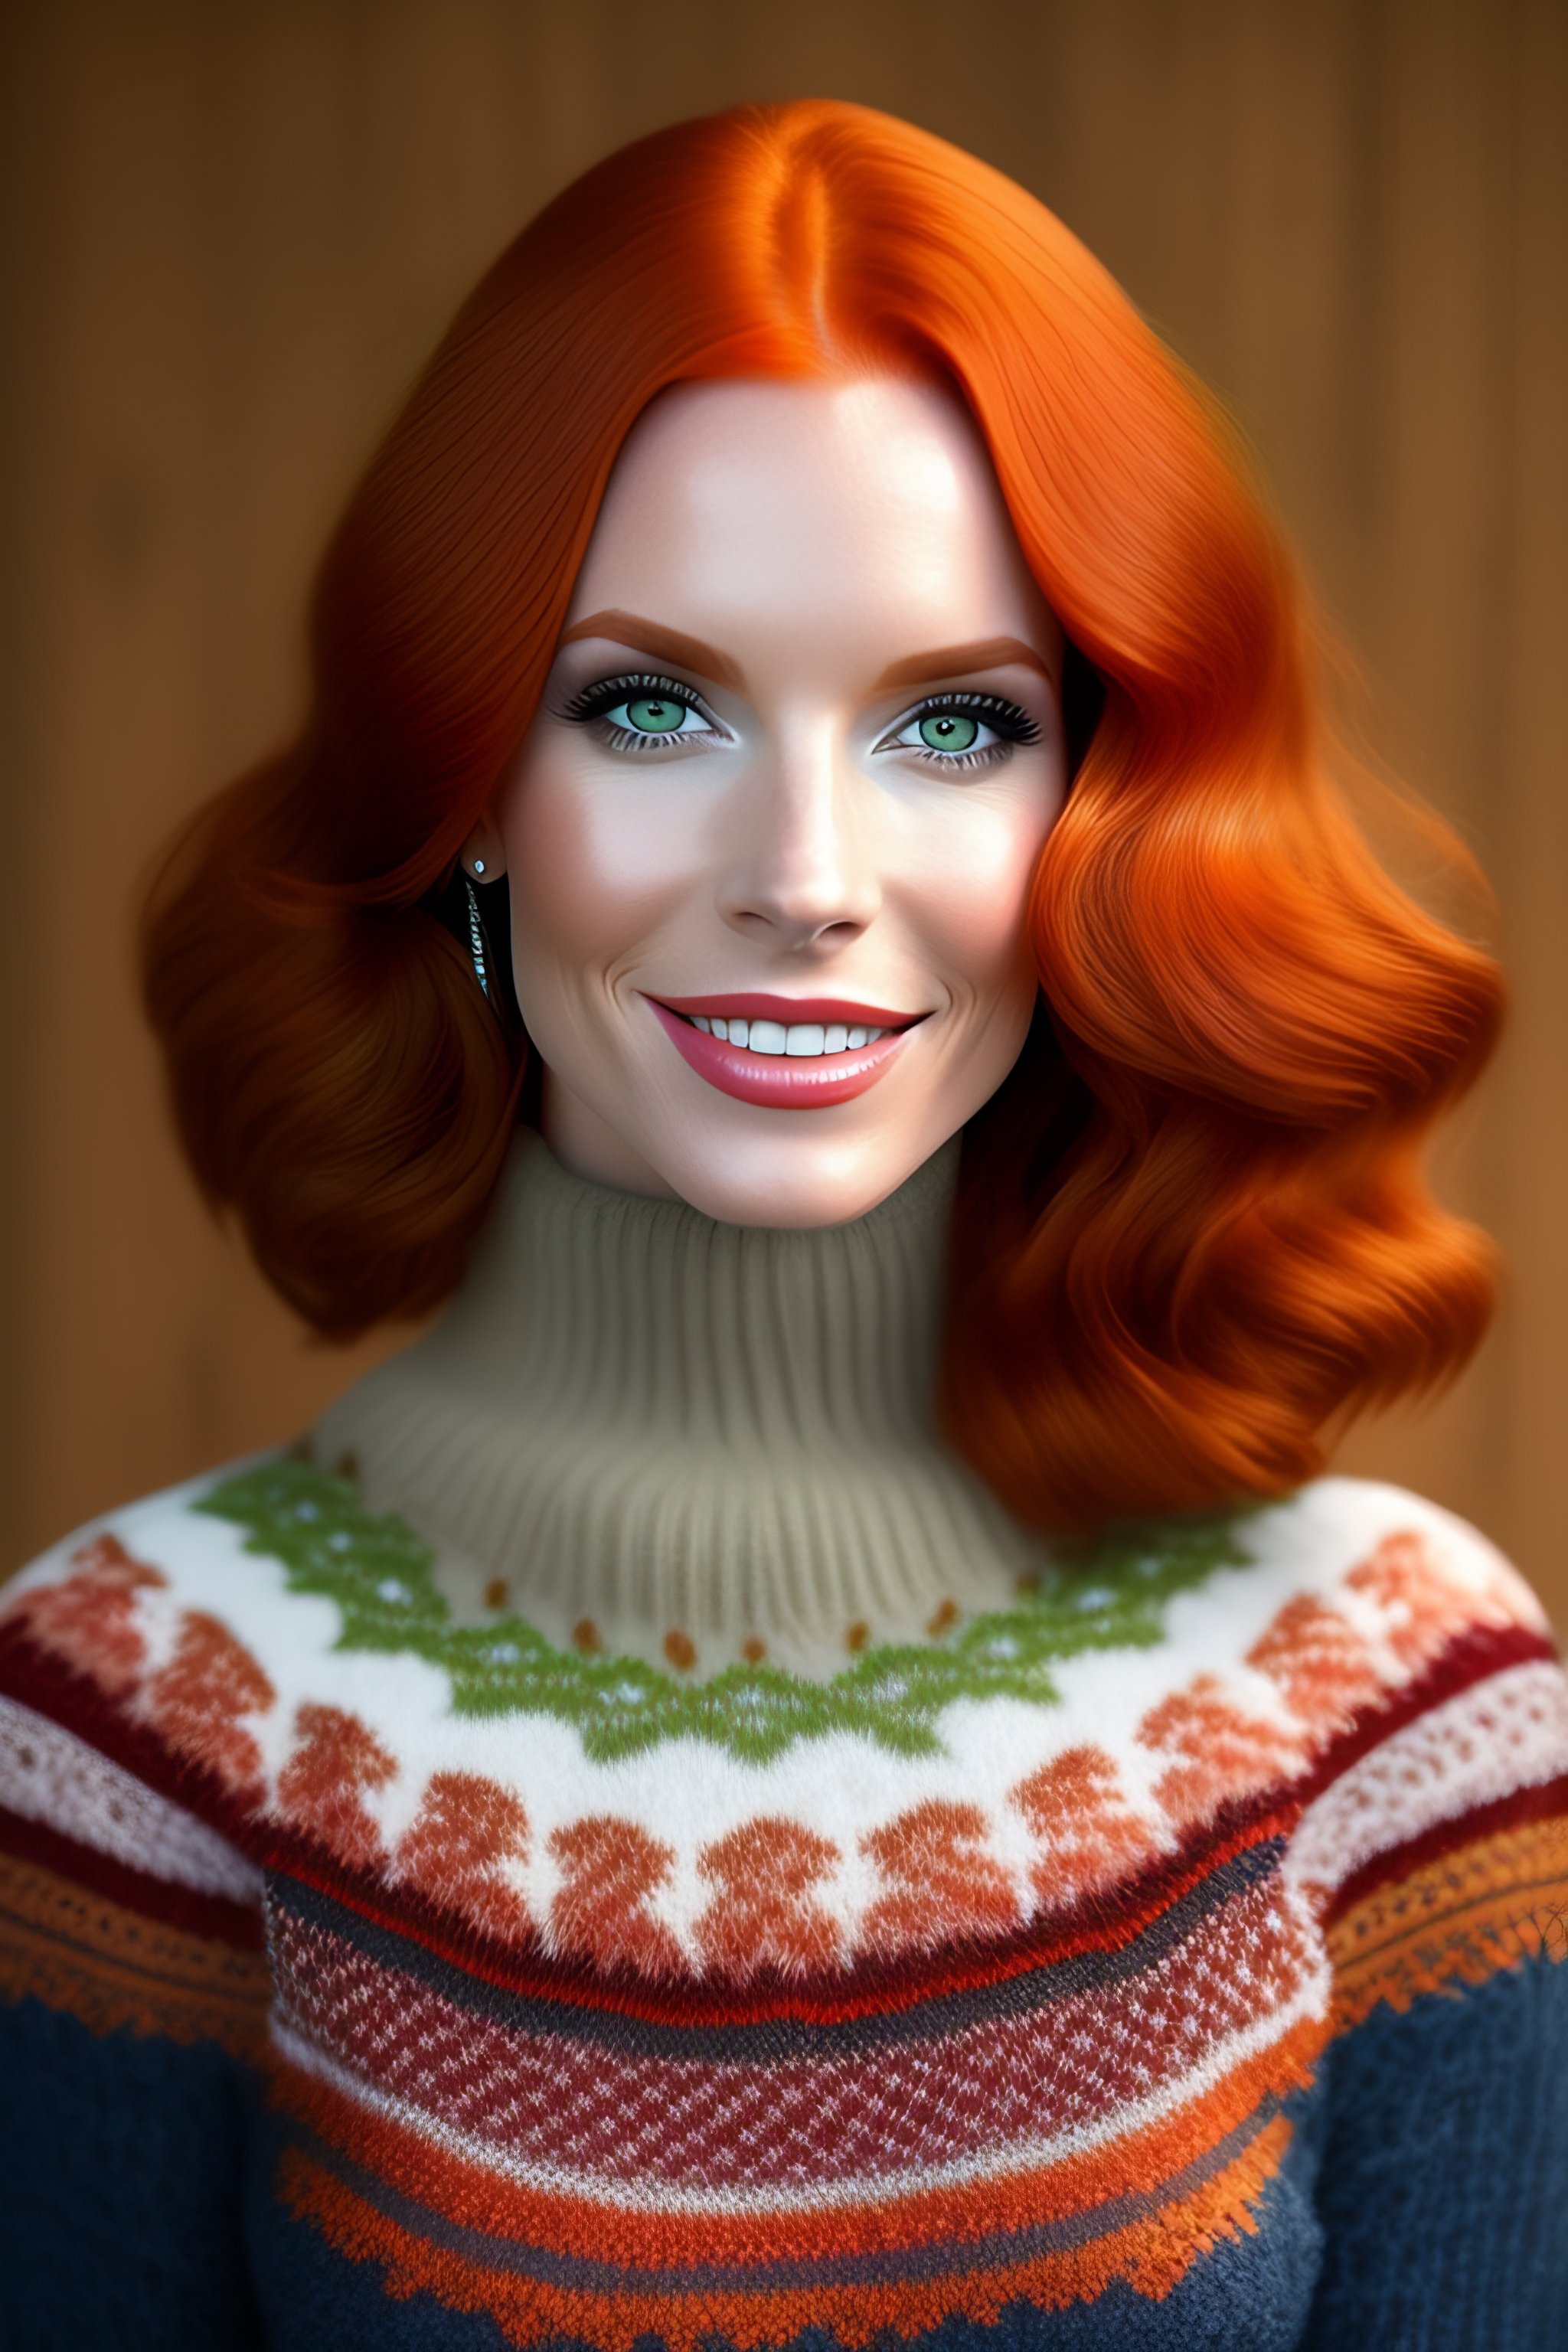 Lexica - Coy redhead with one mole sweater meat